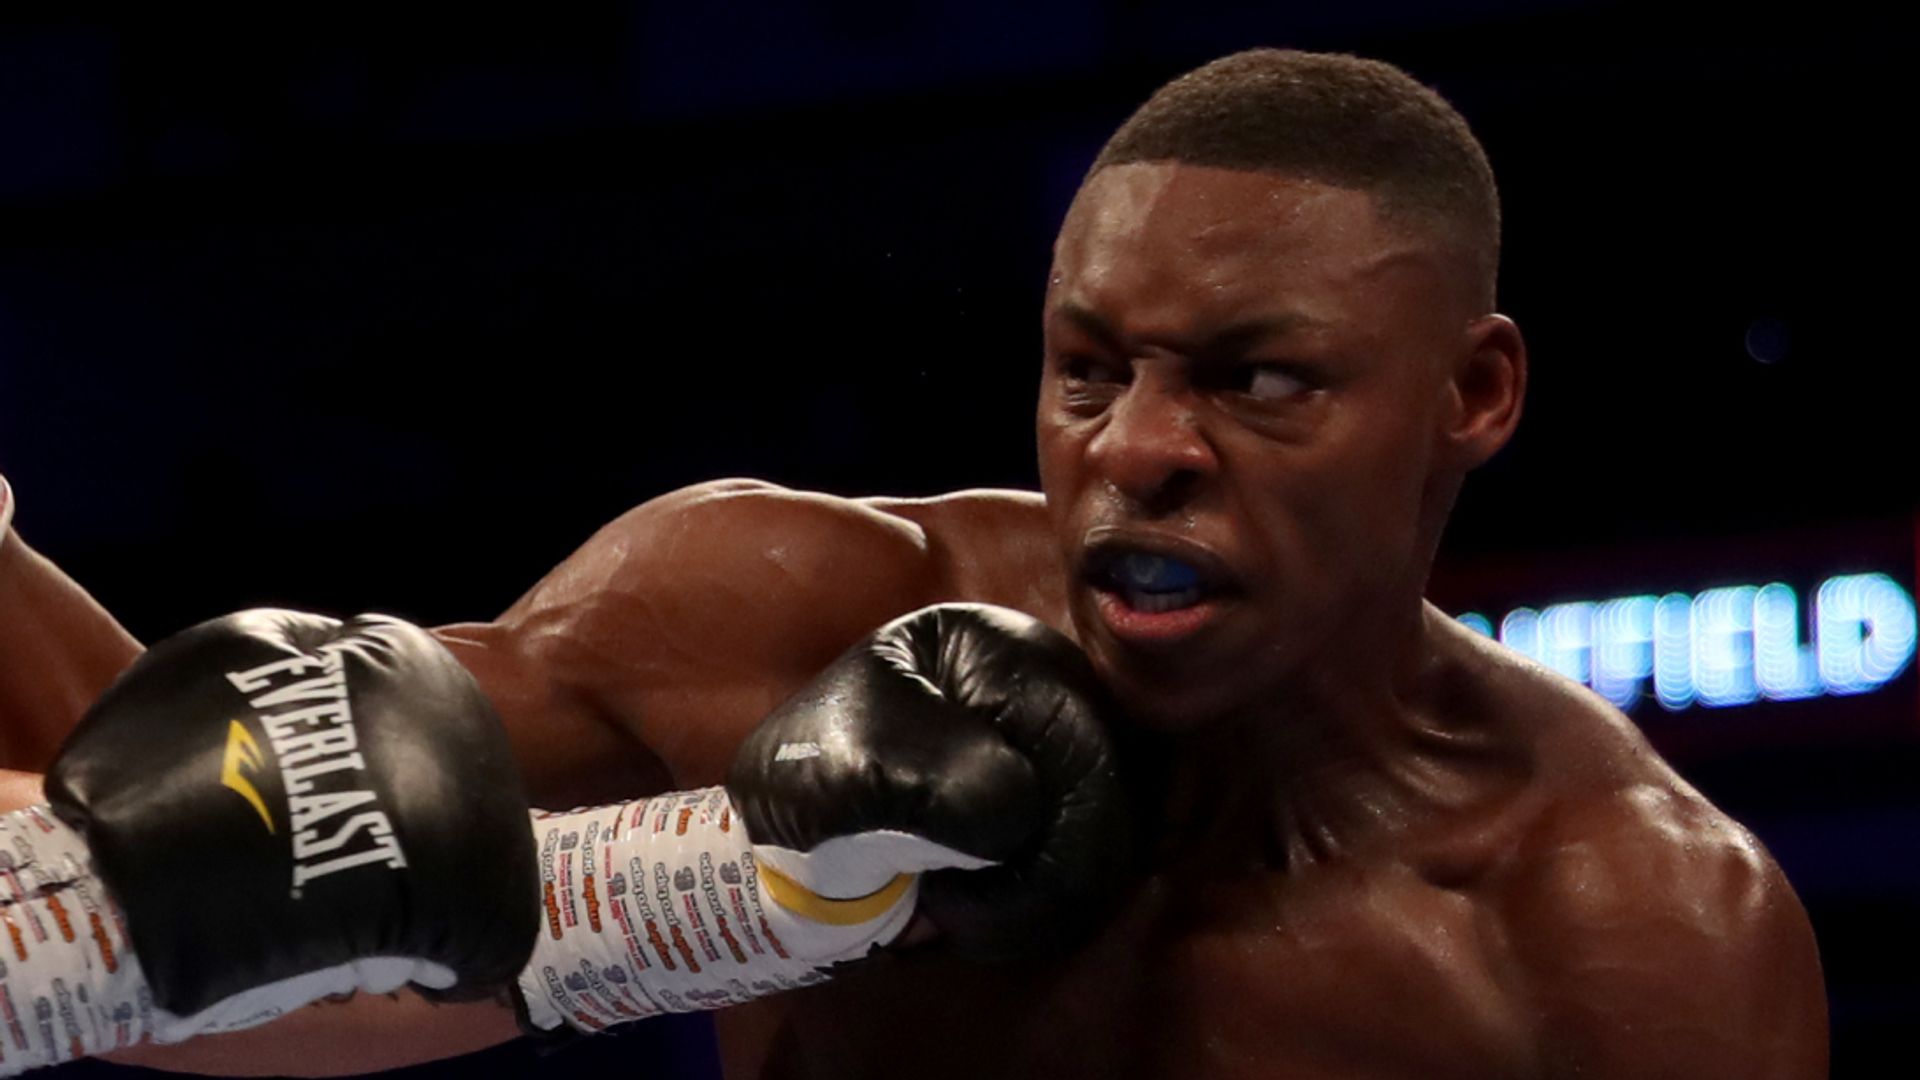 'We want to see who's truly No 1' - Azeez confirms Buatsi showdown